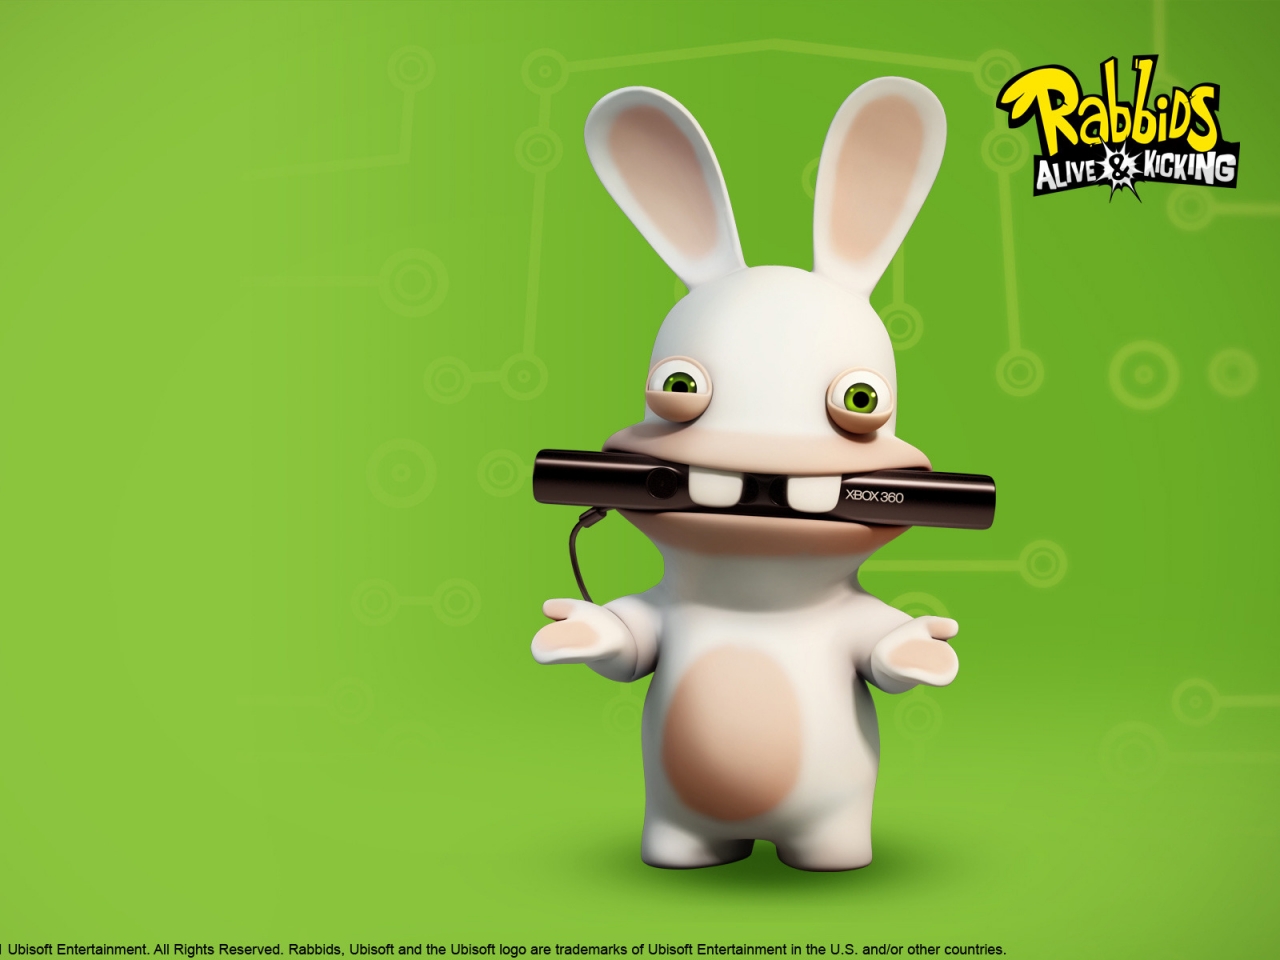 Rabbids Alive and Kicking Game for 1280 x 960 resolution